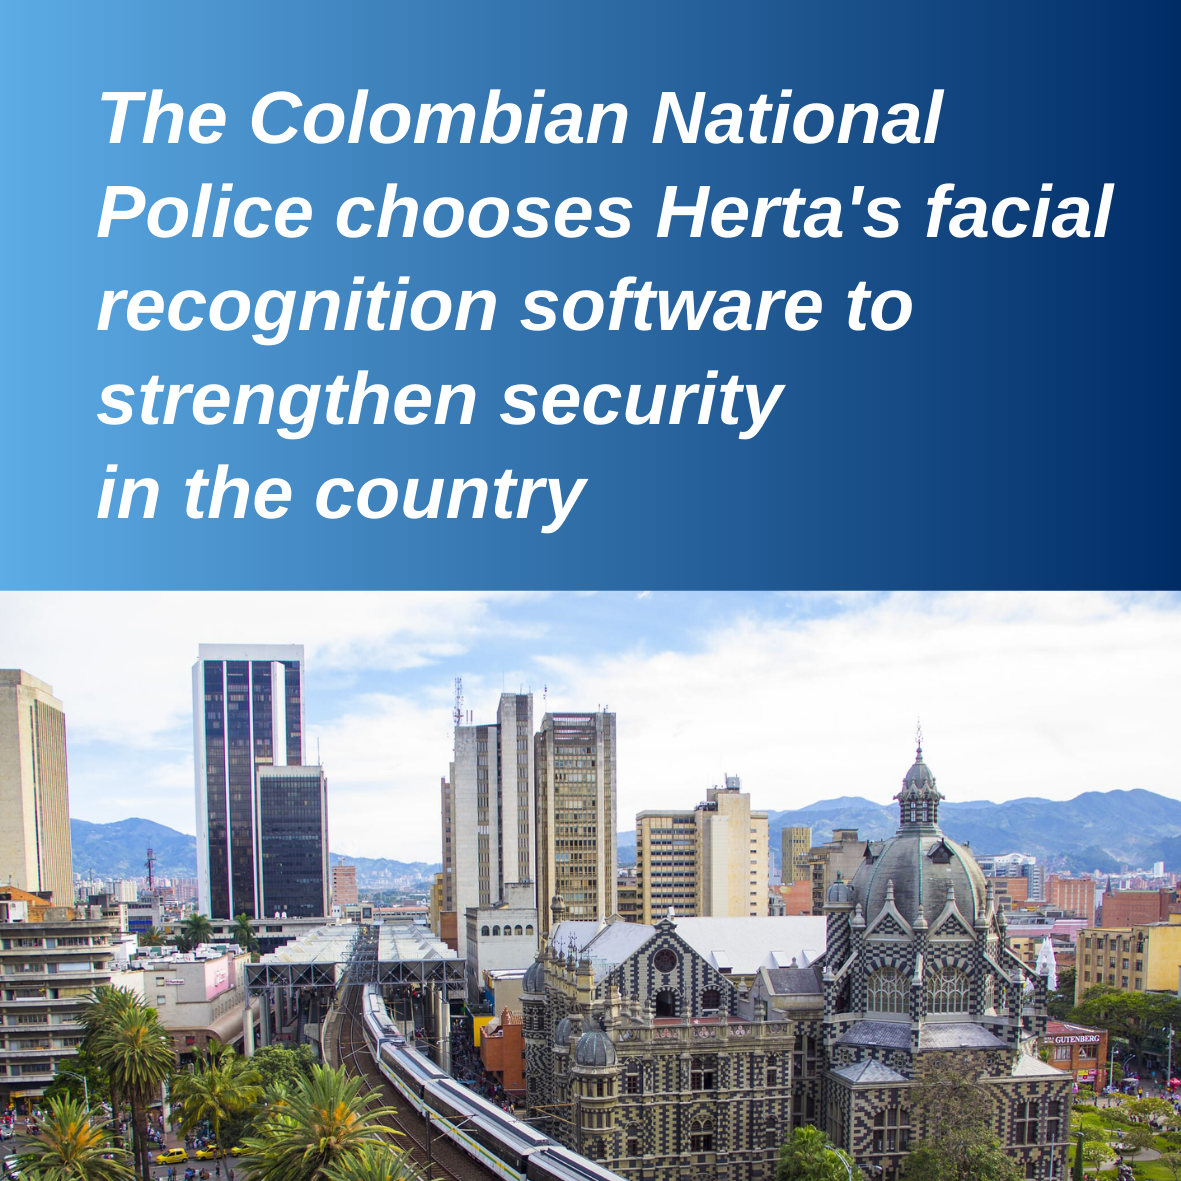 The Colombian National Police chooses Herta’s facial recognition software to strengthen security in the country